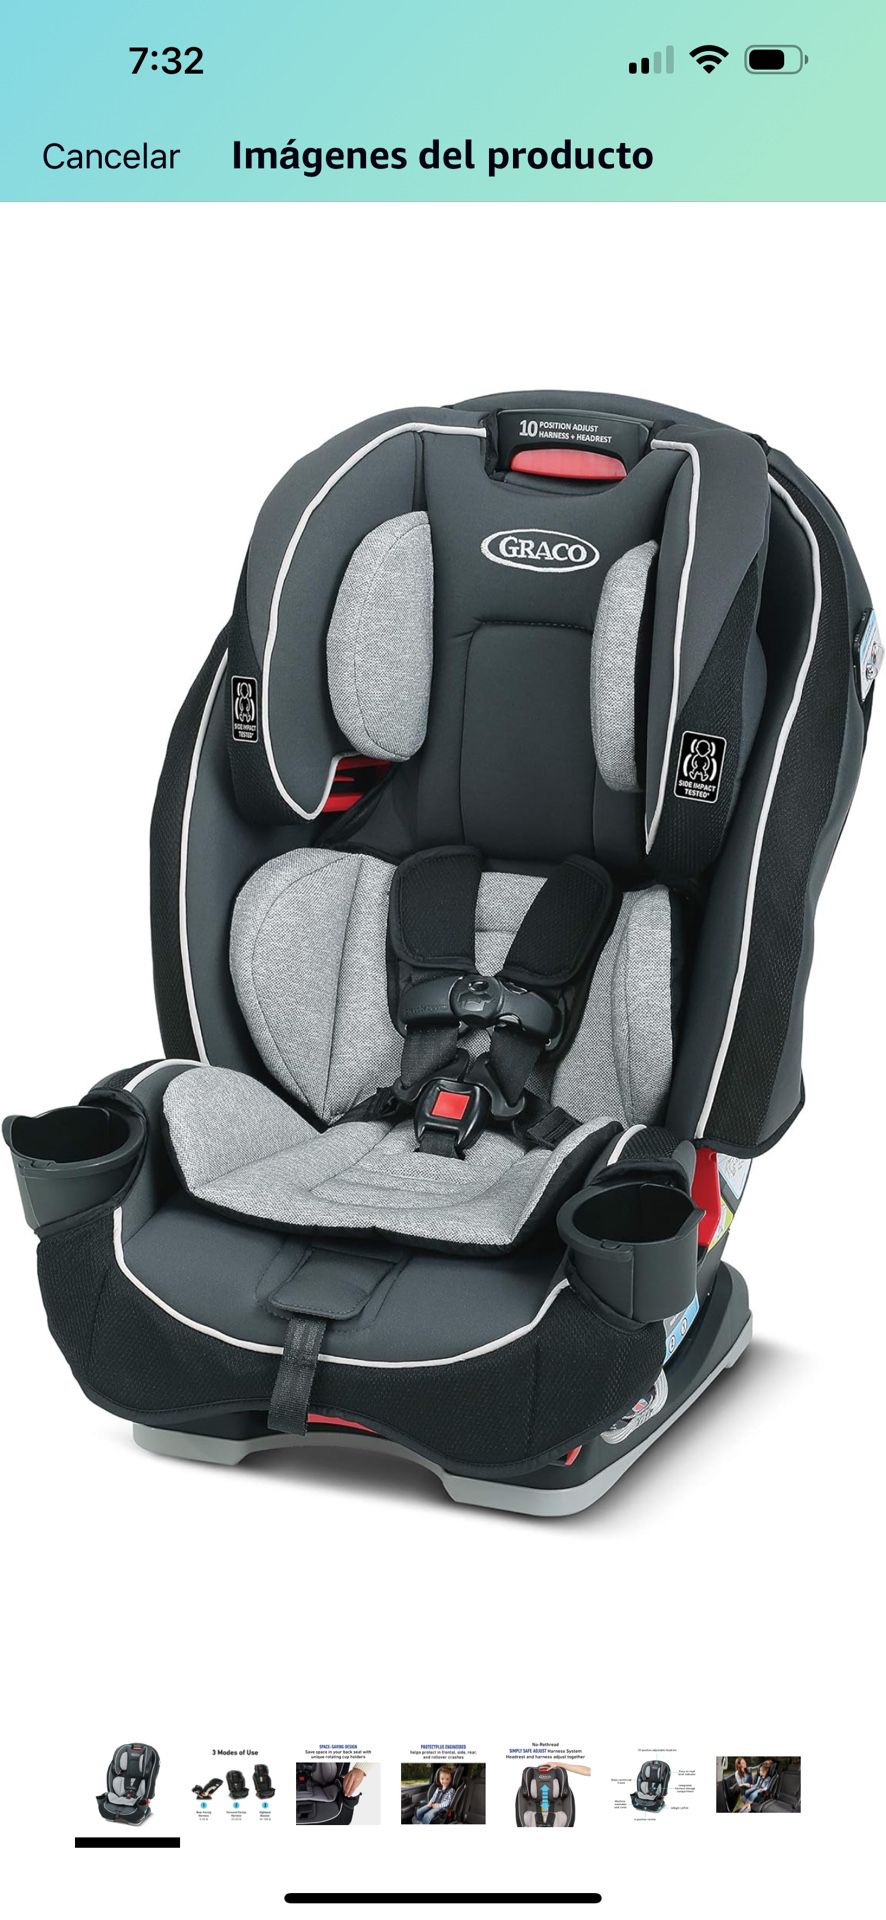 Graco SlimFit All-in-One Convertible Car Seat, Darcie